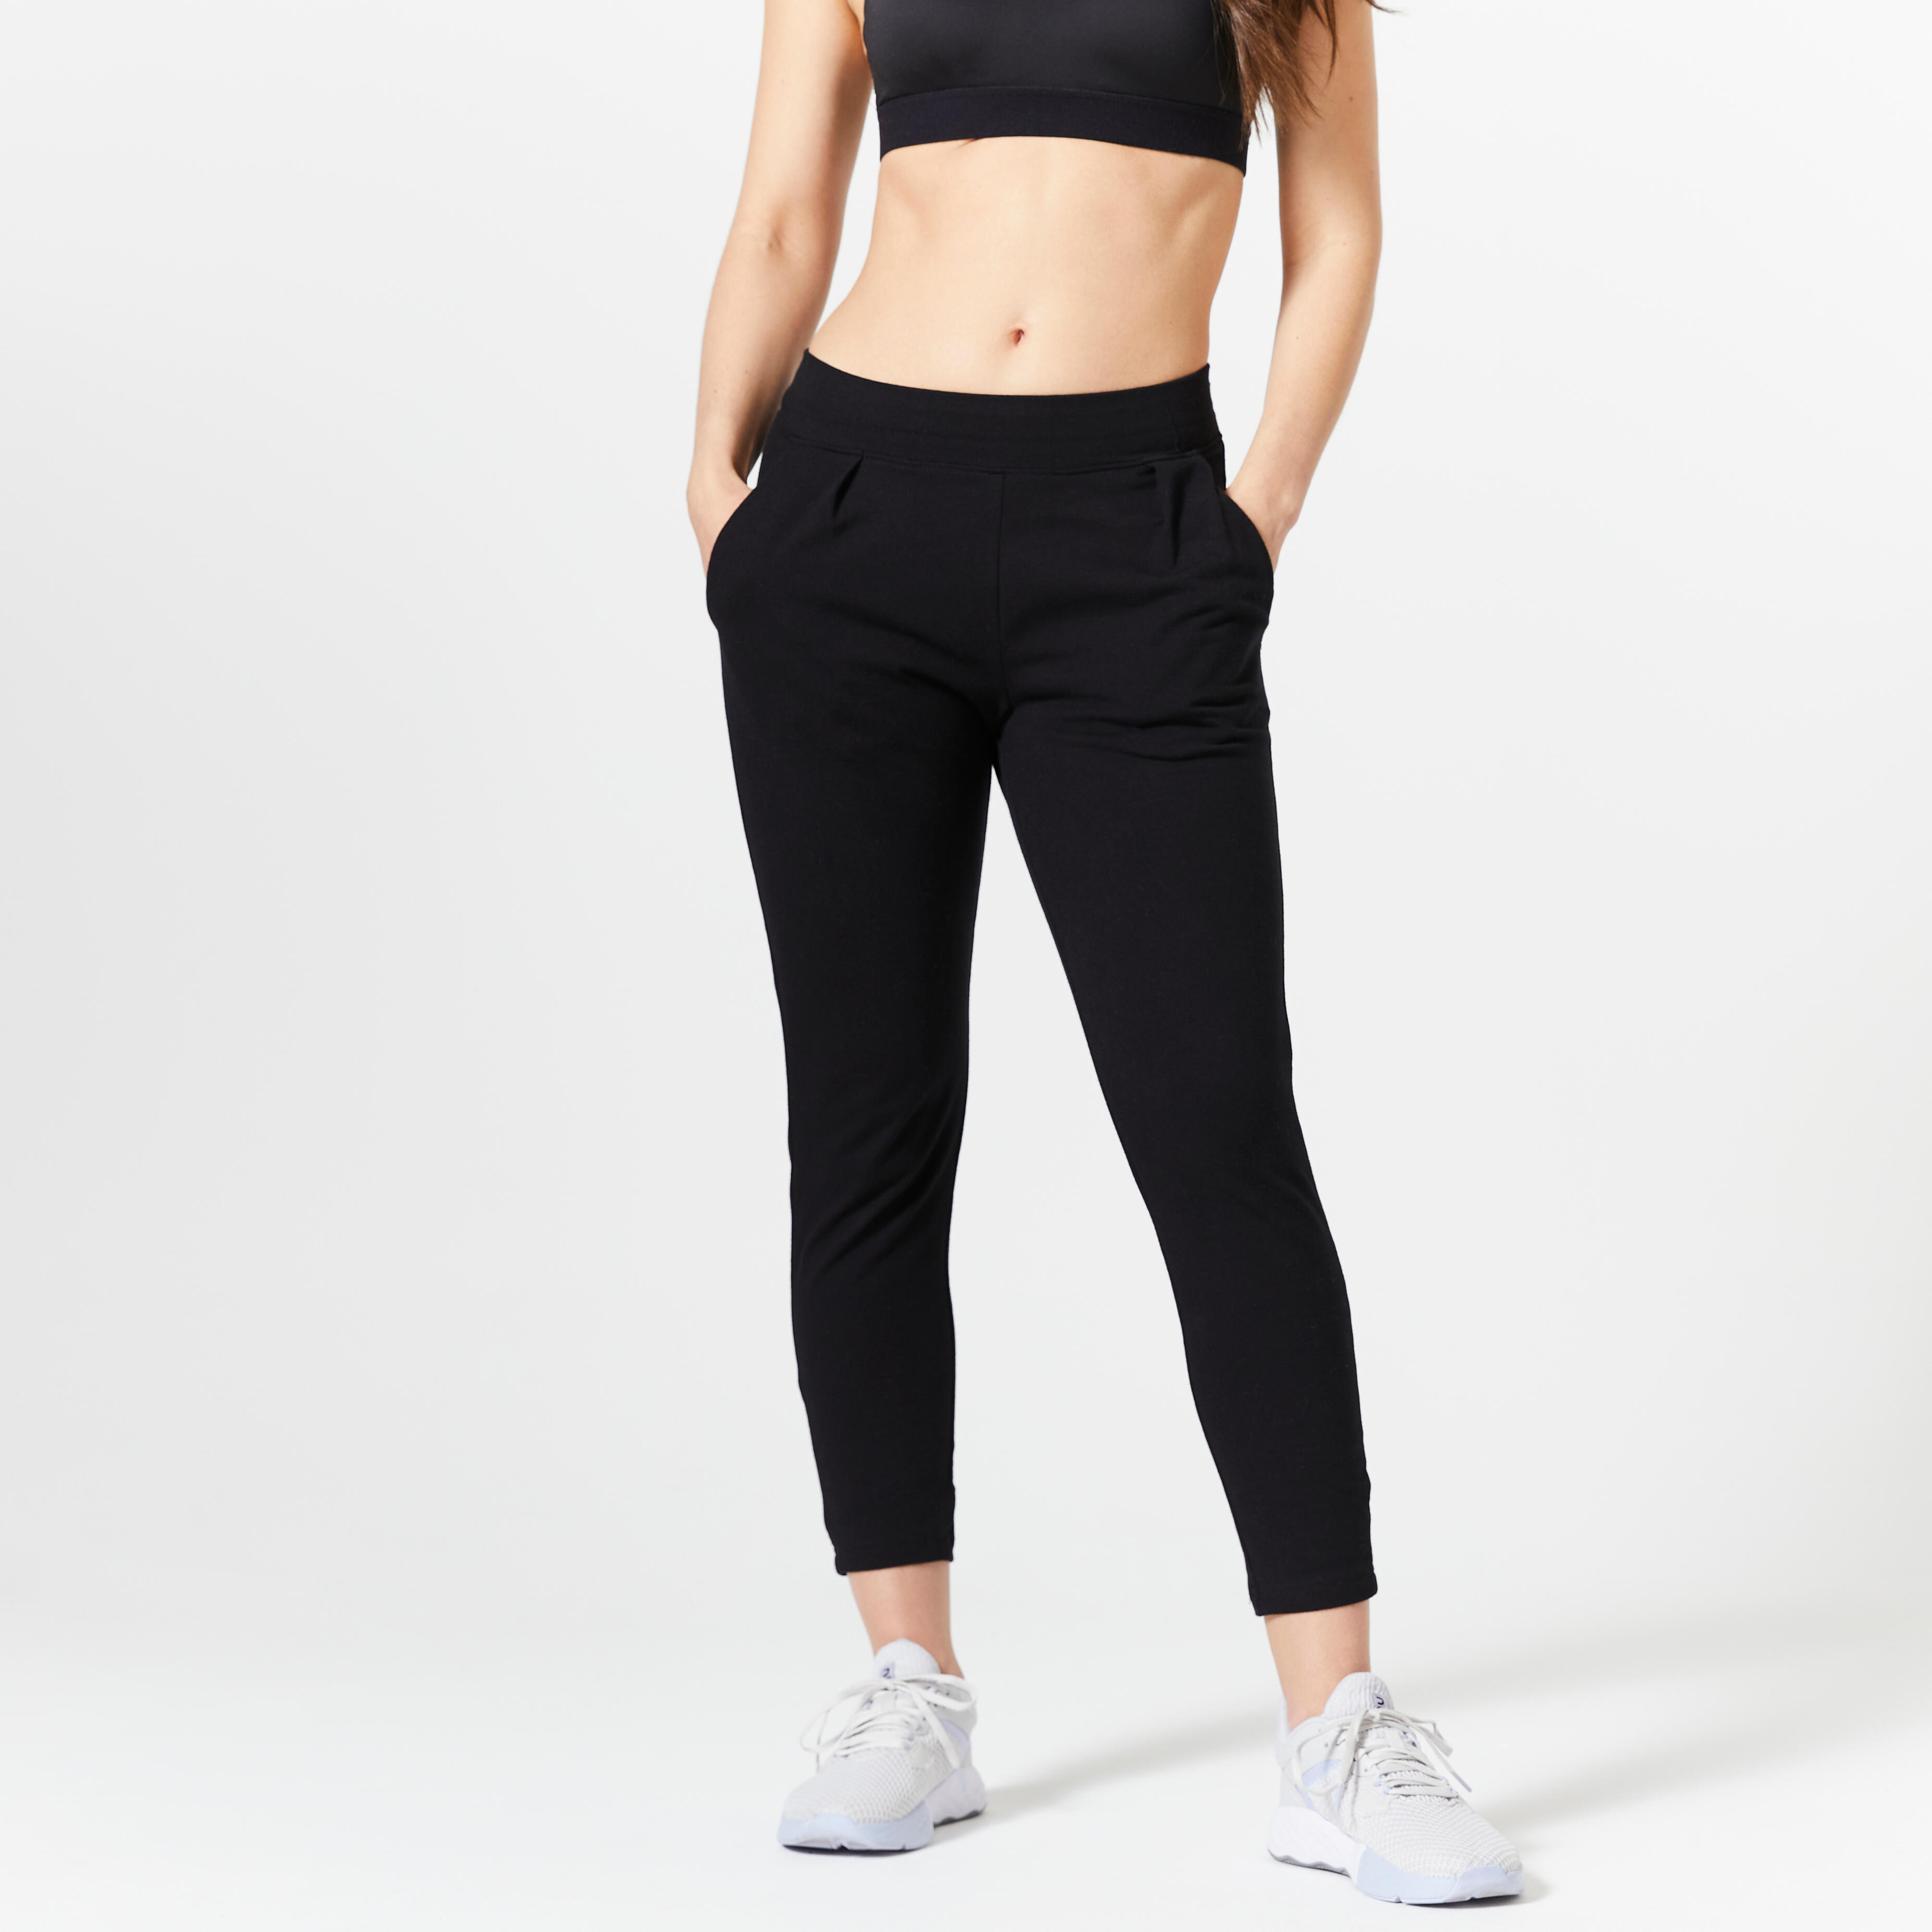  Domyos Track Pants For Women